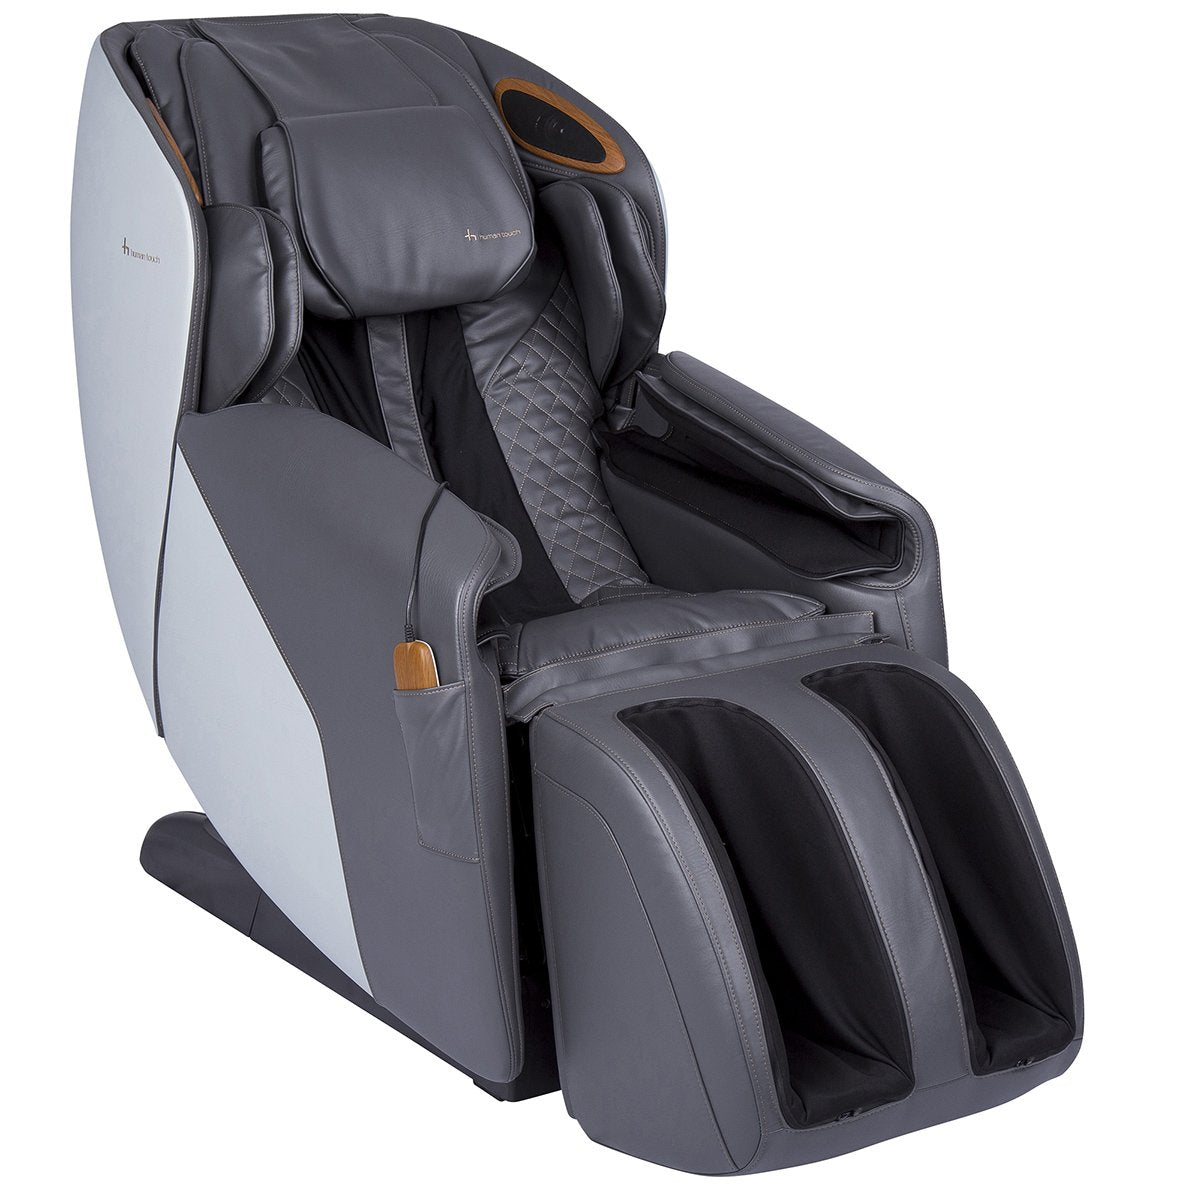 Human Touch Quies Massage Chair Massage Chair Human Touch Gray Standard (Free) 